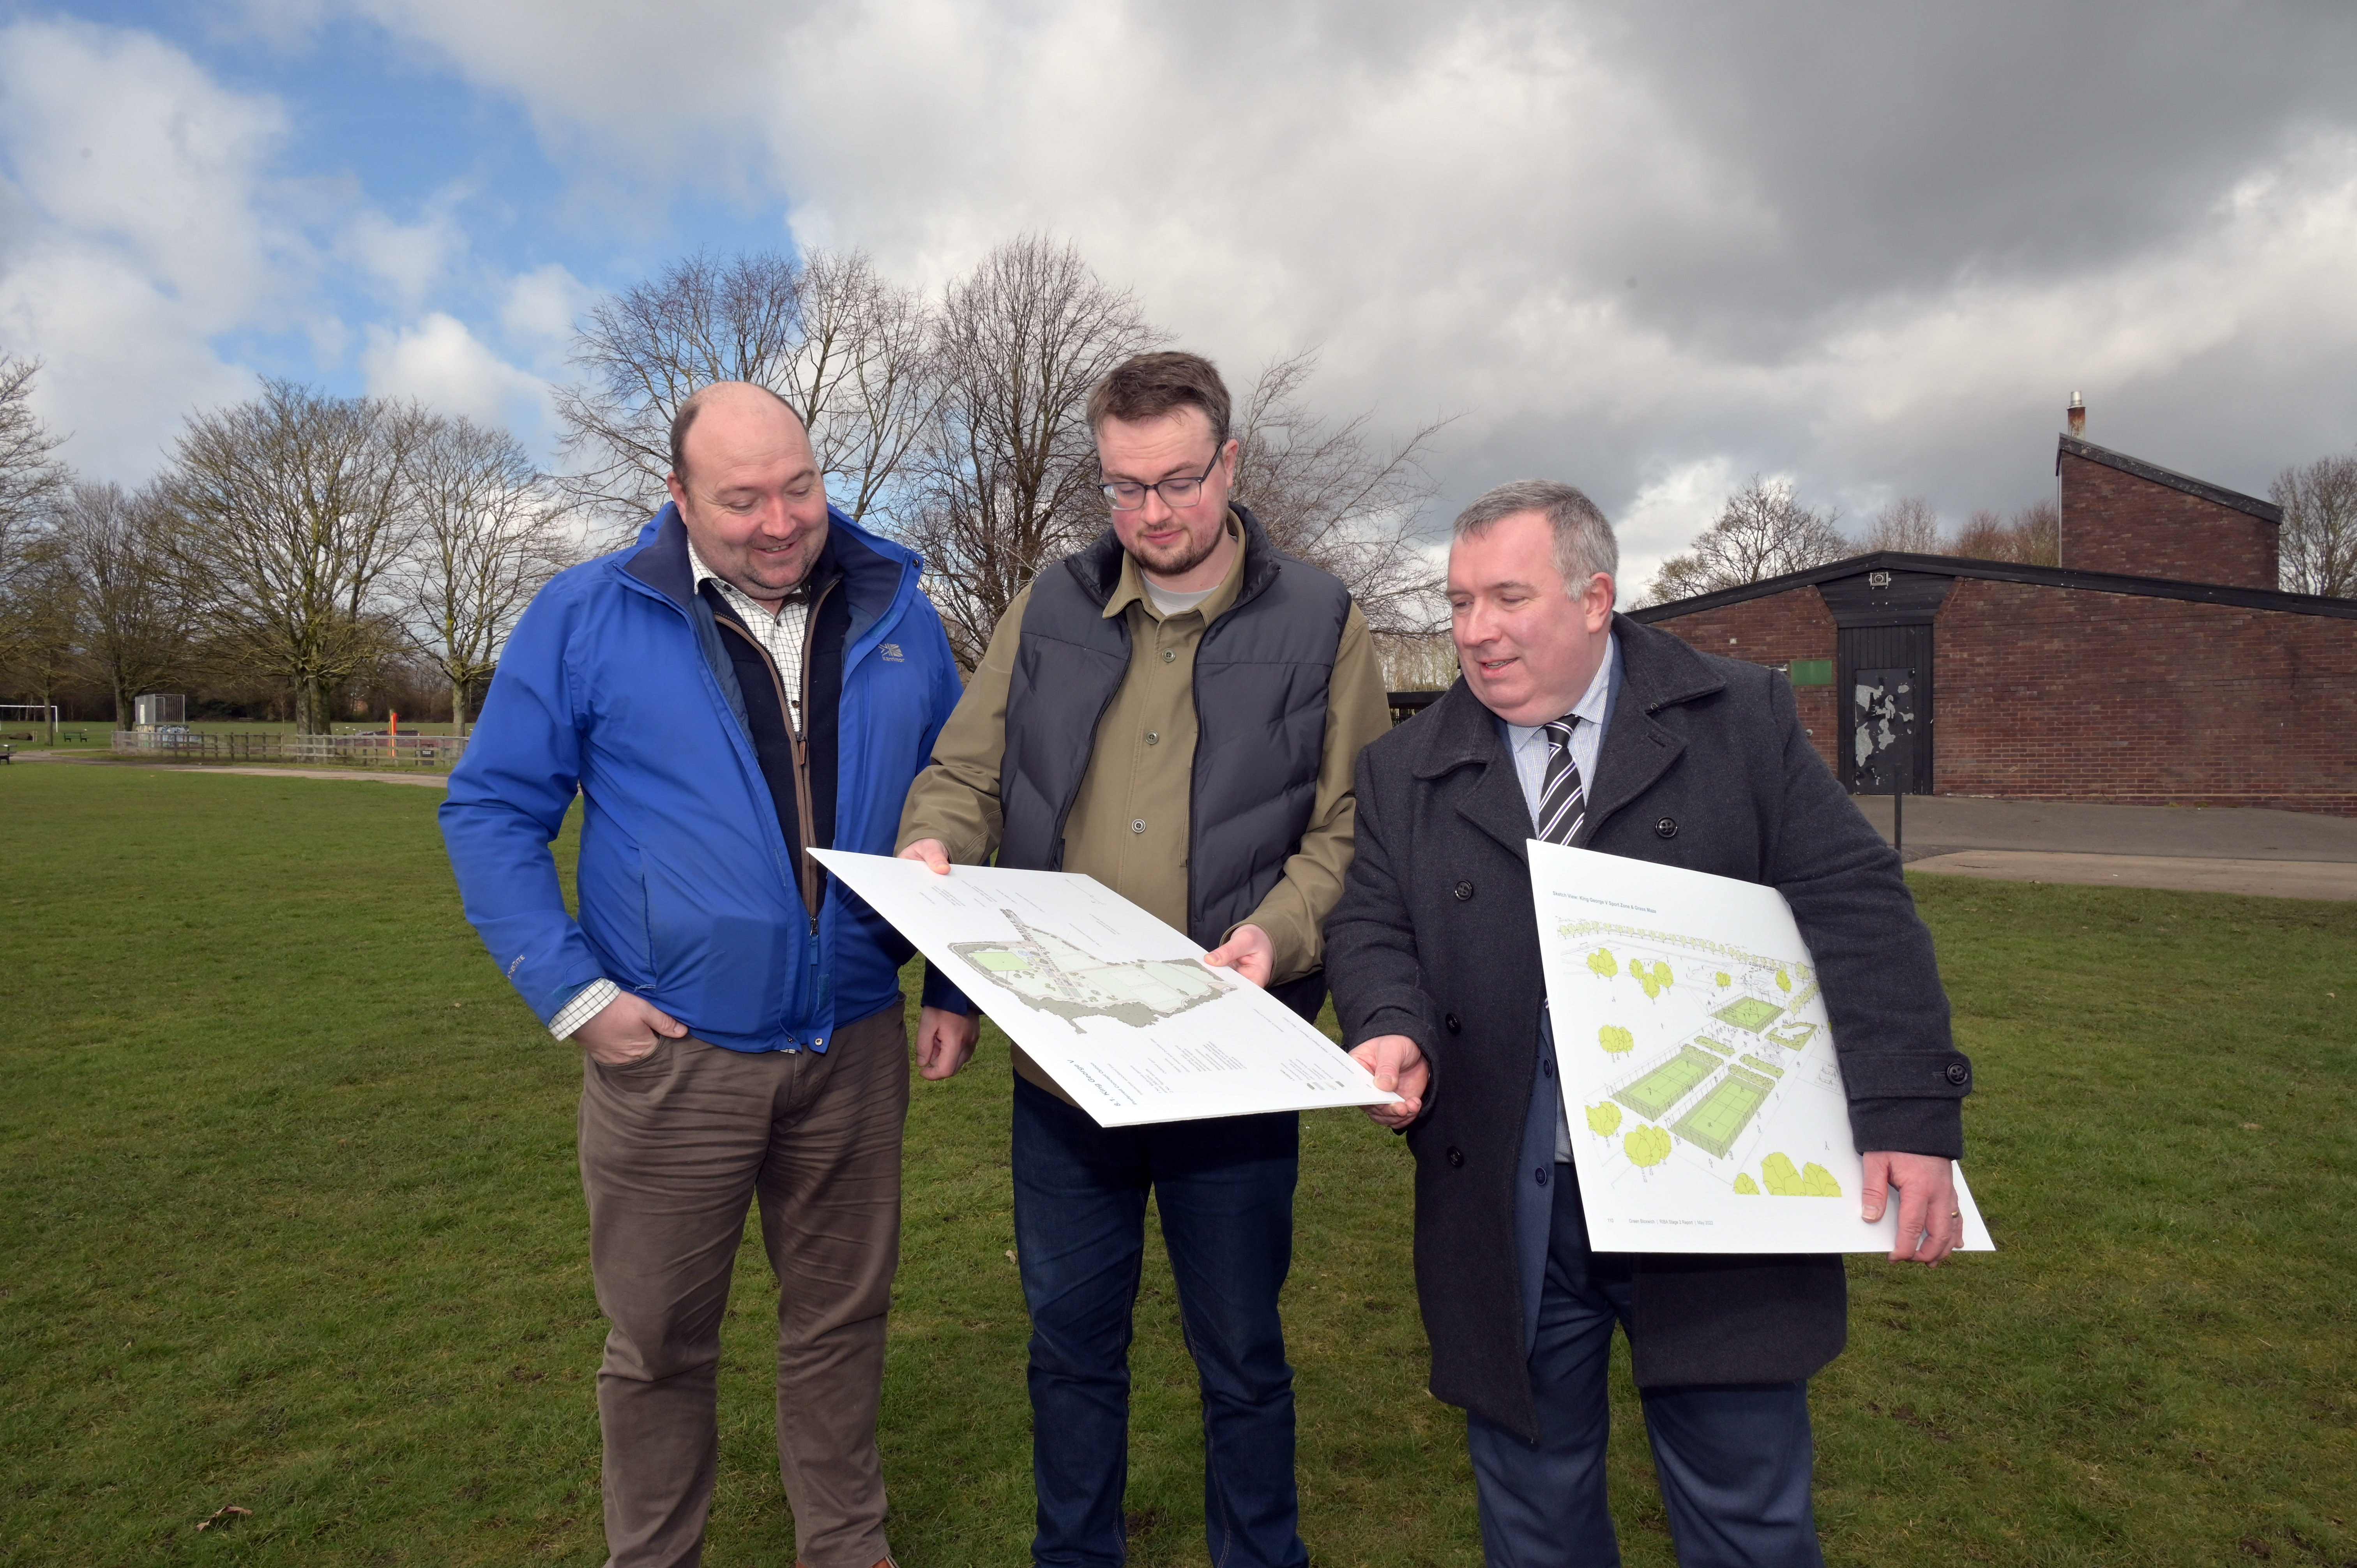 Councillor Gary Flint, Councillor Matt Follows and Councillor Adrian Andrew reviewing plans for King George V park standing on the playing field